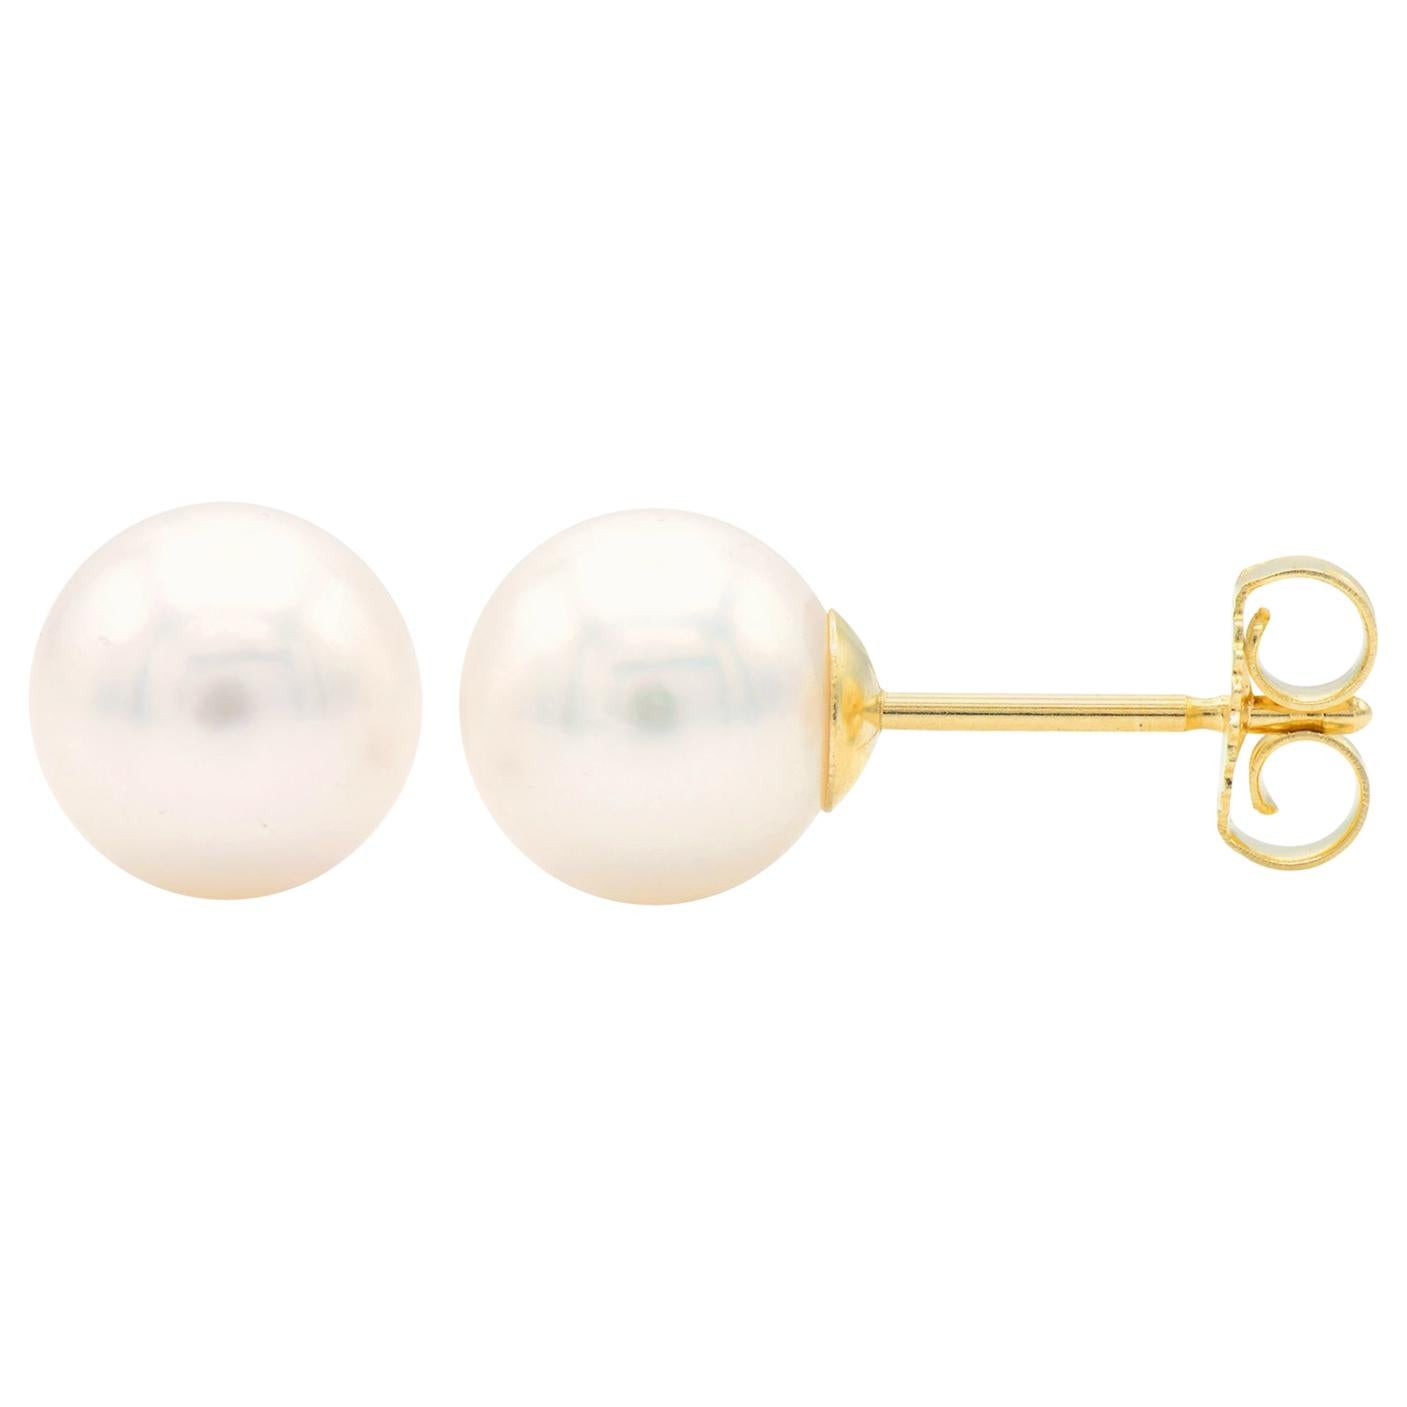 Cultured Pearl Stud Earrings 6MM with 14 Karat Yellow Gold Posts and Backs